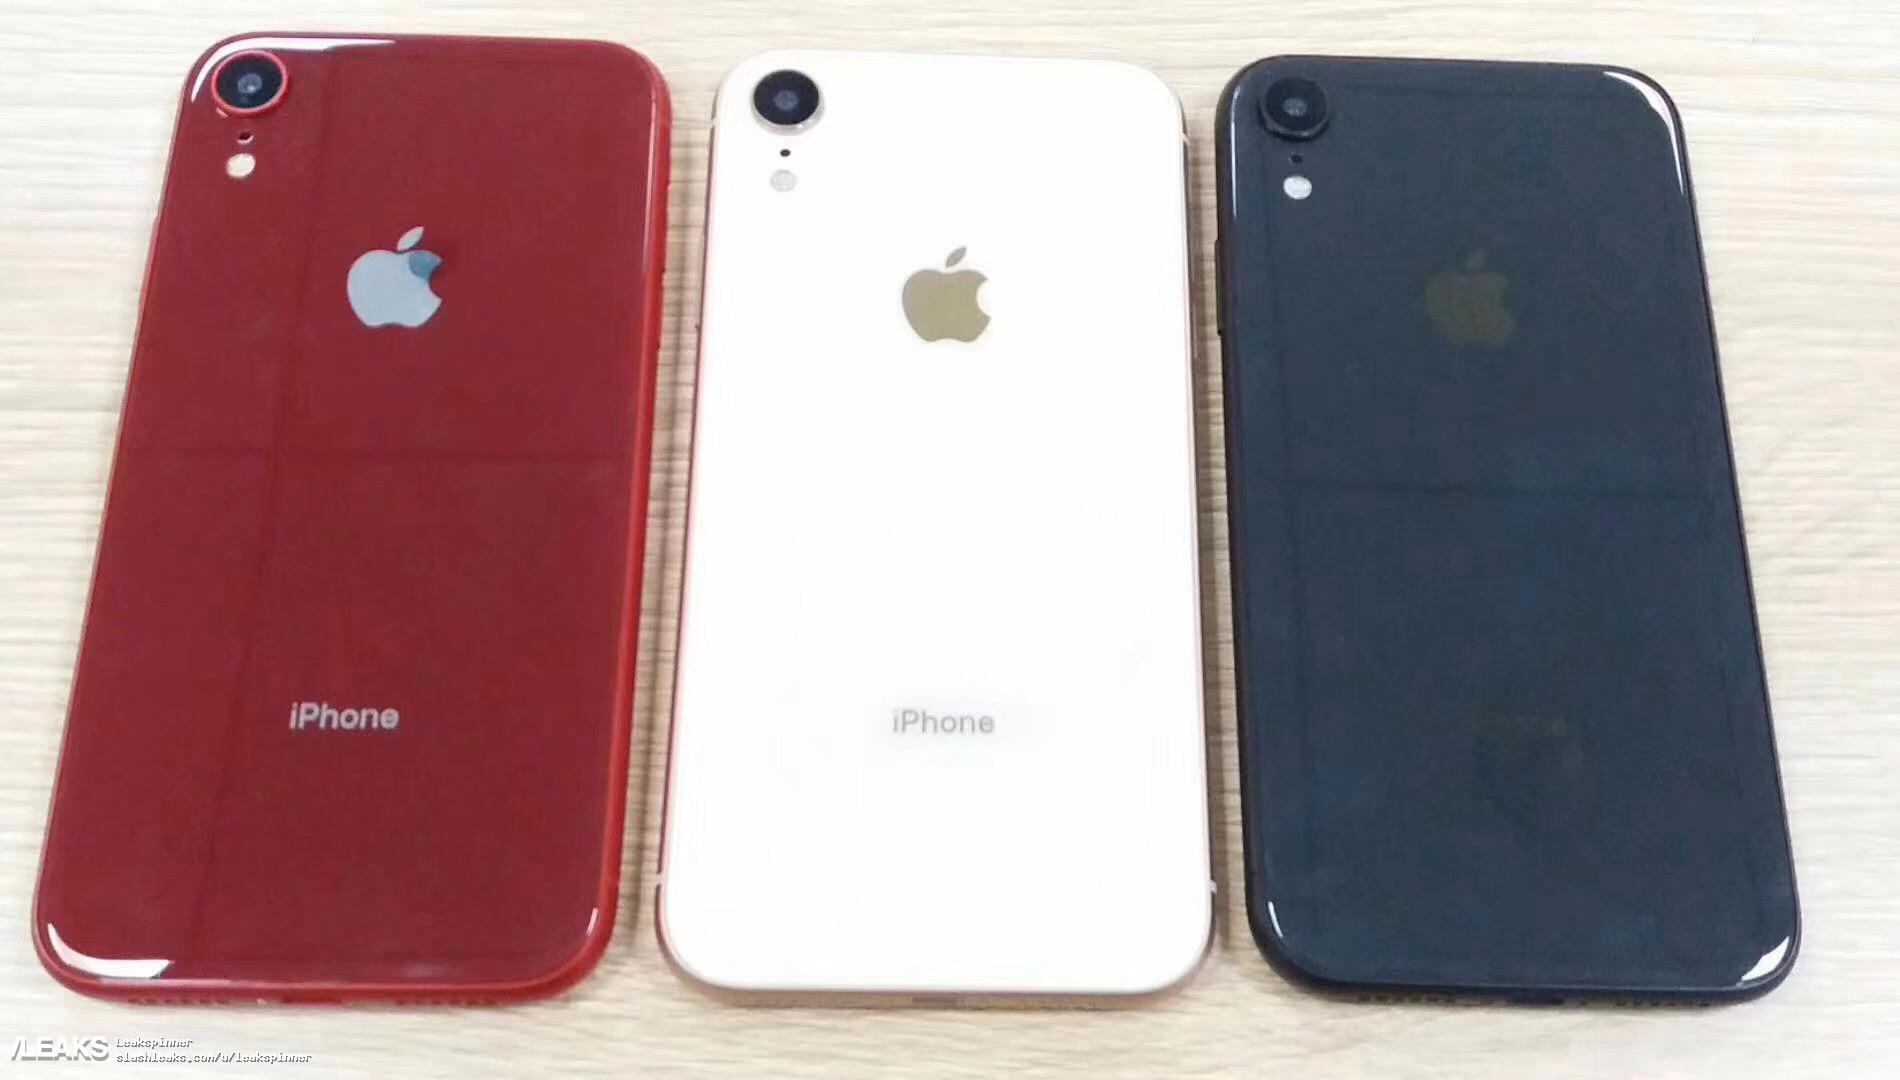 Check Out the iPhone 9's Colors in New Leak